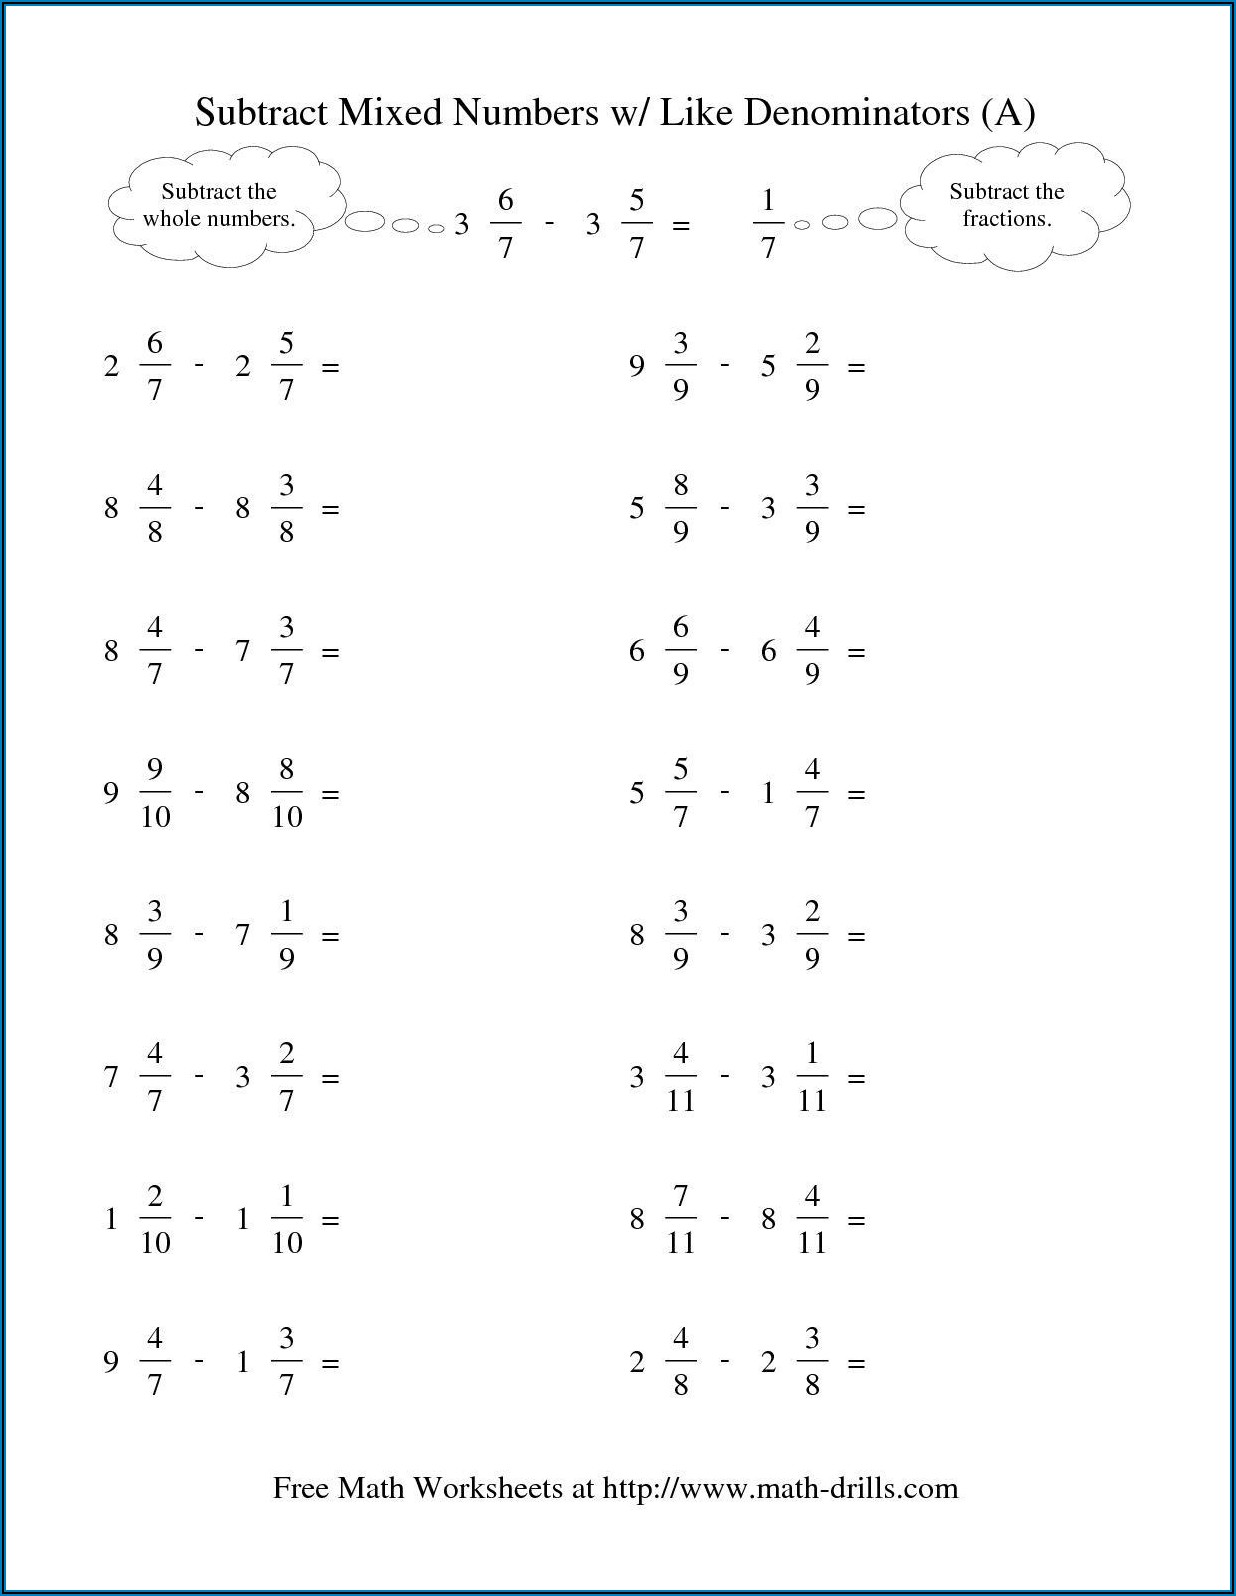 Subtract Mixed Numbers Worksheet